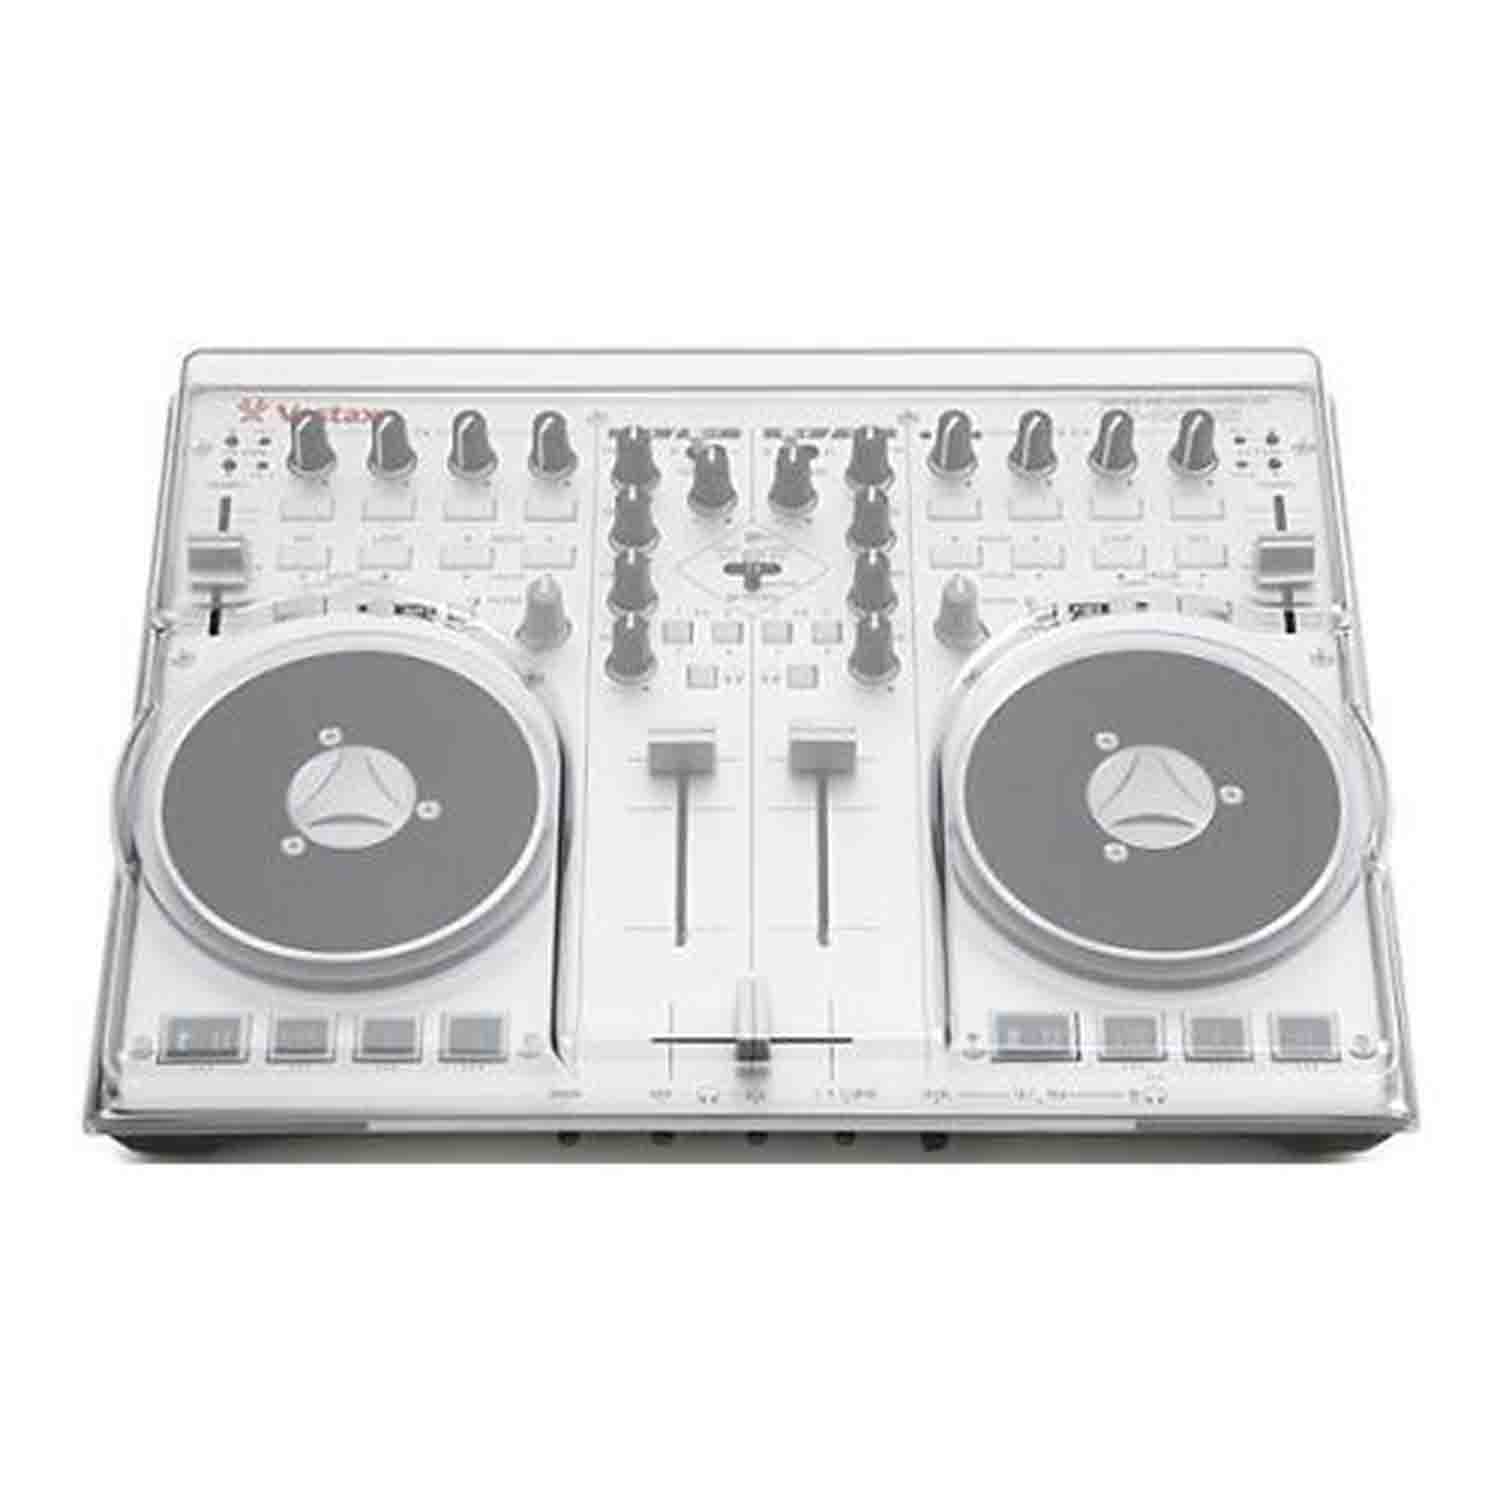 B-Stock: Decksaver DS-PC-VCI100MKII Protection Cover for Pioneer Vestax VCI-100 MKII DJ Controller - Hollywood DJ